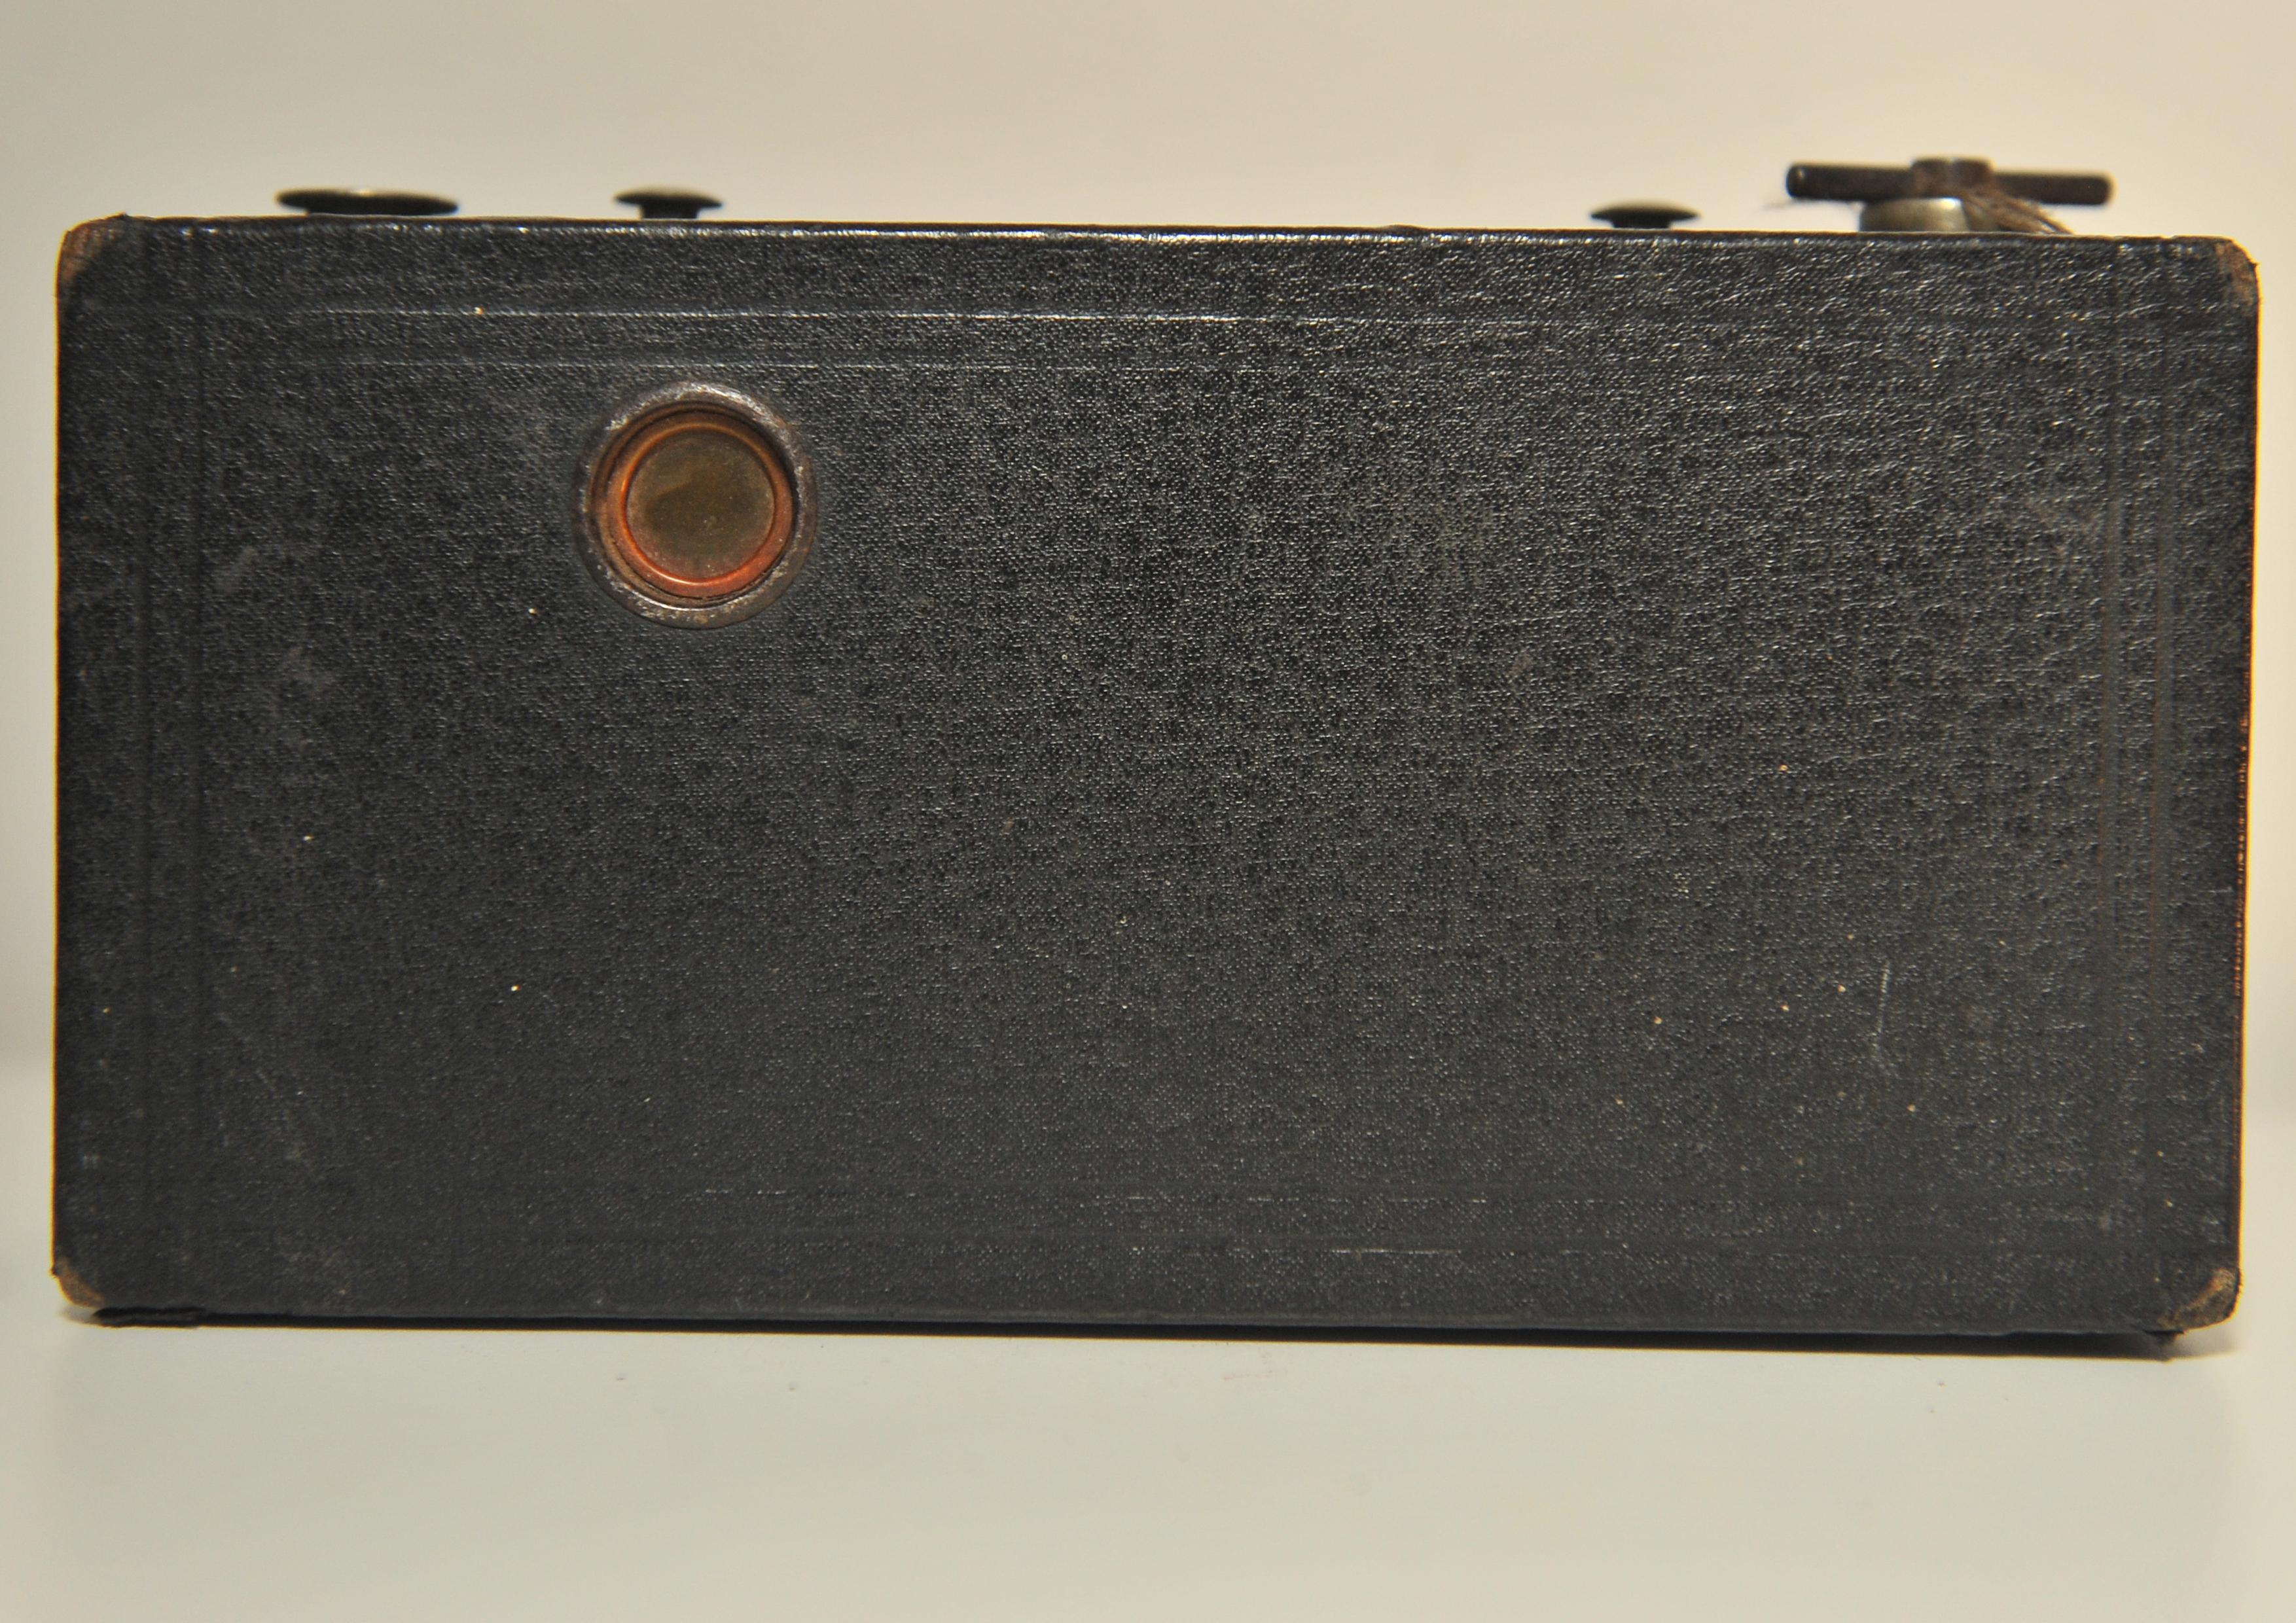 Kodak No 2 Folding Pocket Brownie Model B 120 Roll Film Camera USA 1909 In Good Condition For Sale In High Wycombe, GB